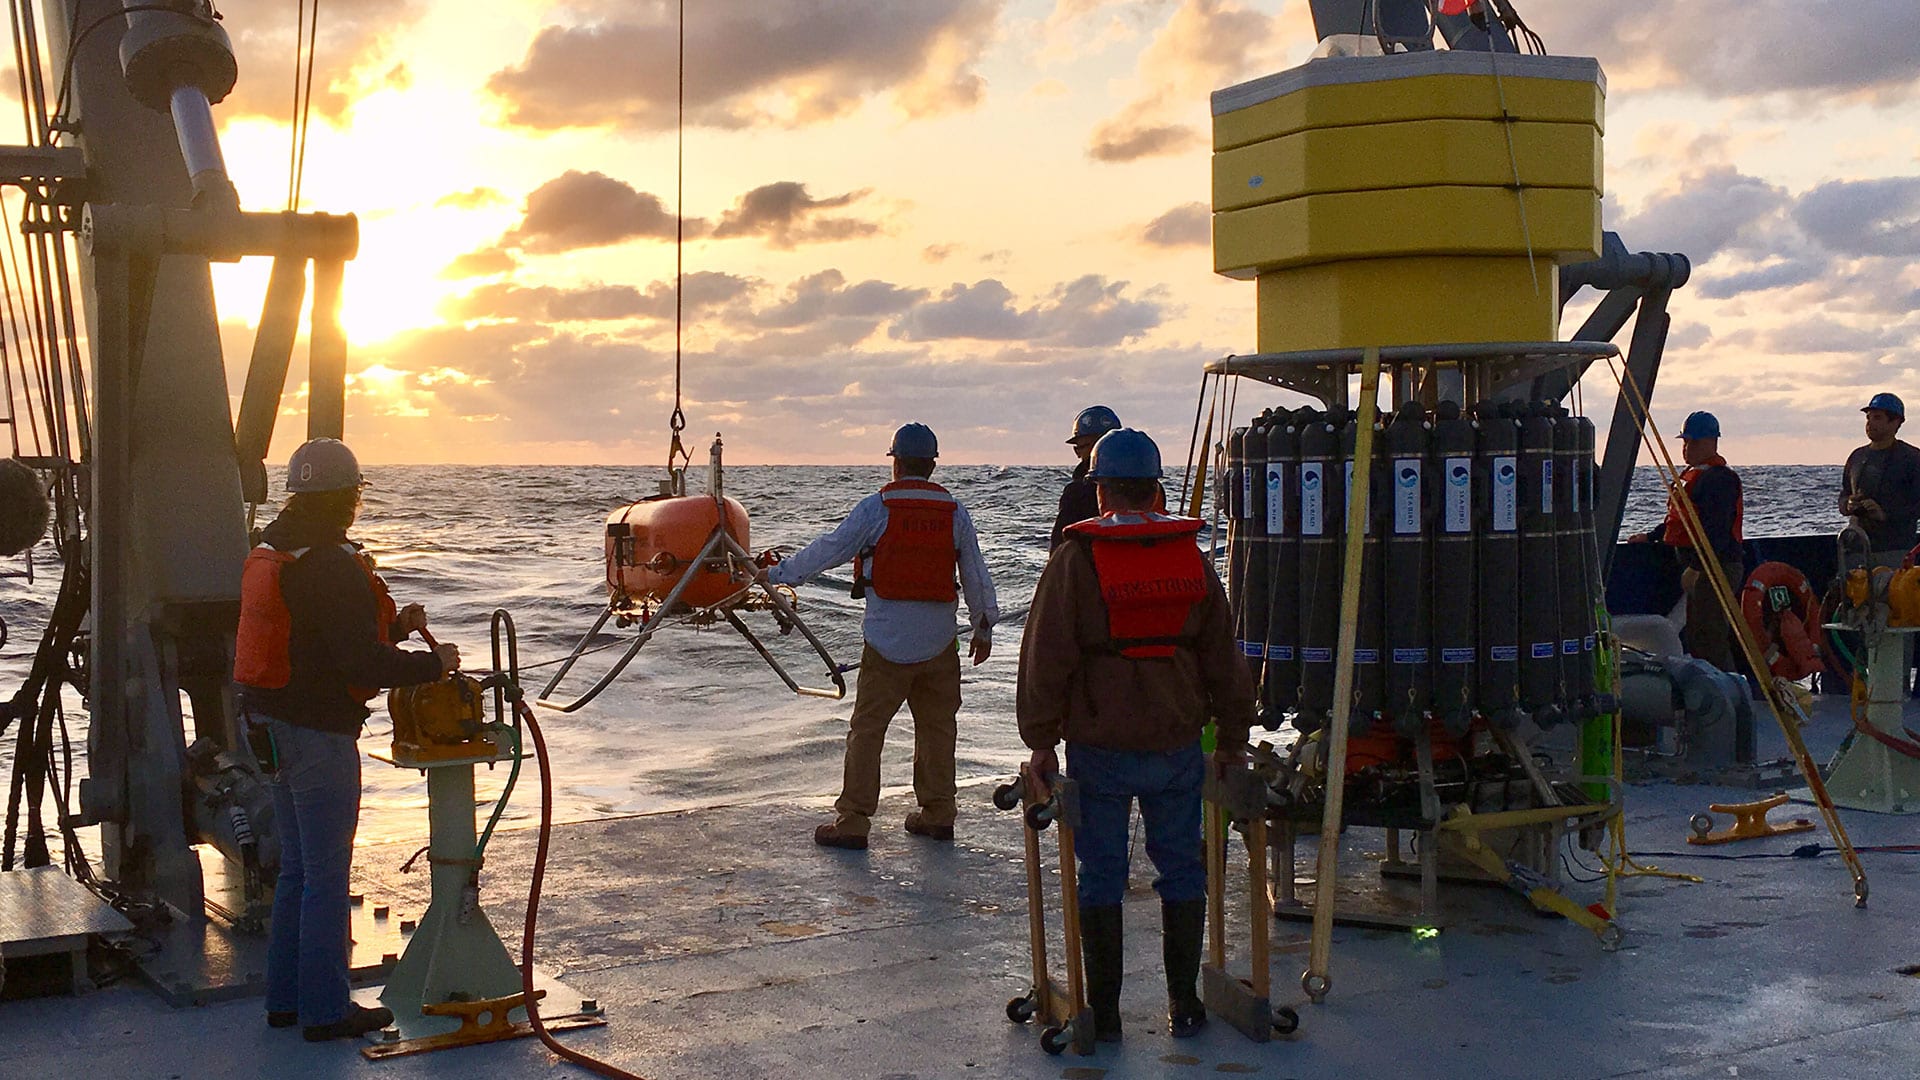 The <i>Neil Armstrong</i> crew begins lowering <i>Orpheus</i> into the Atlantic Ocean for one of the three dives planned for the expedition. (Photo by Emiley Lockhart, Woods Hole Oceanographic Institution)